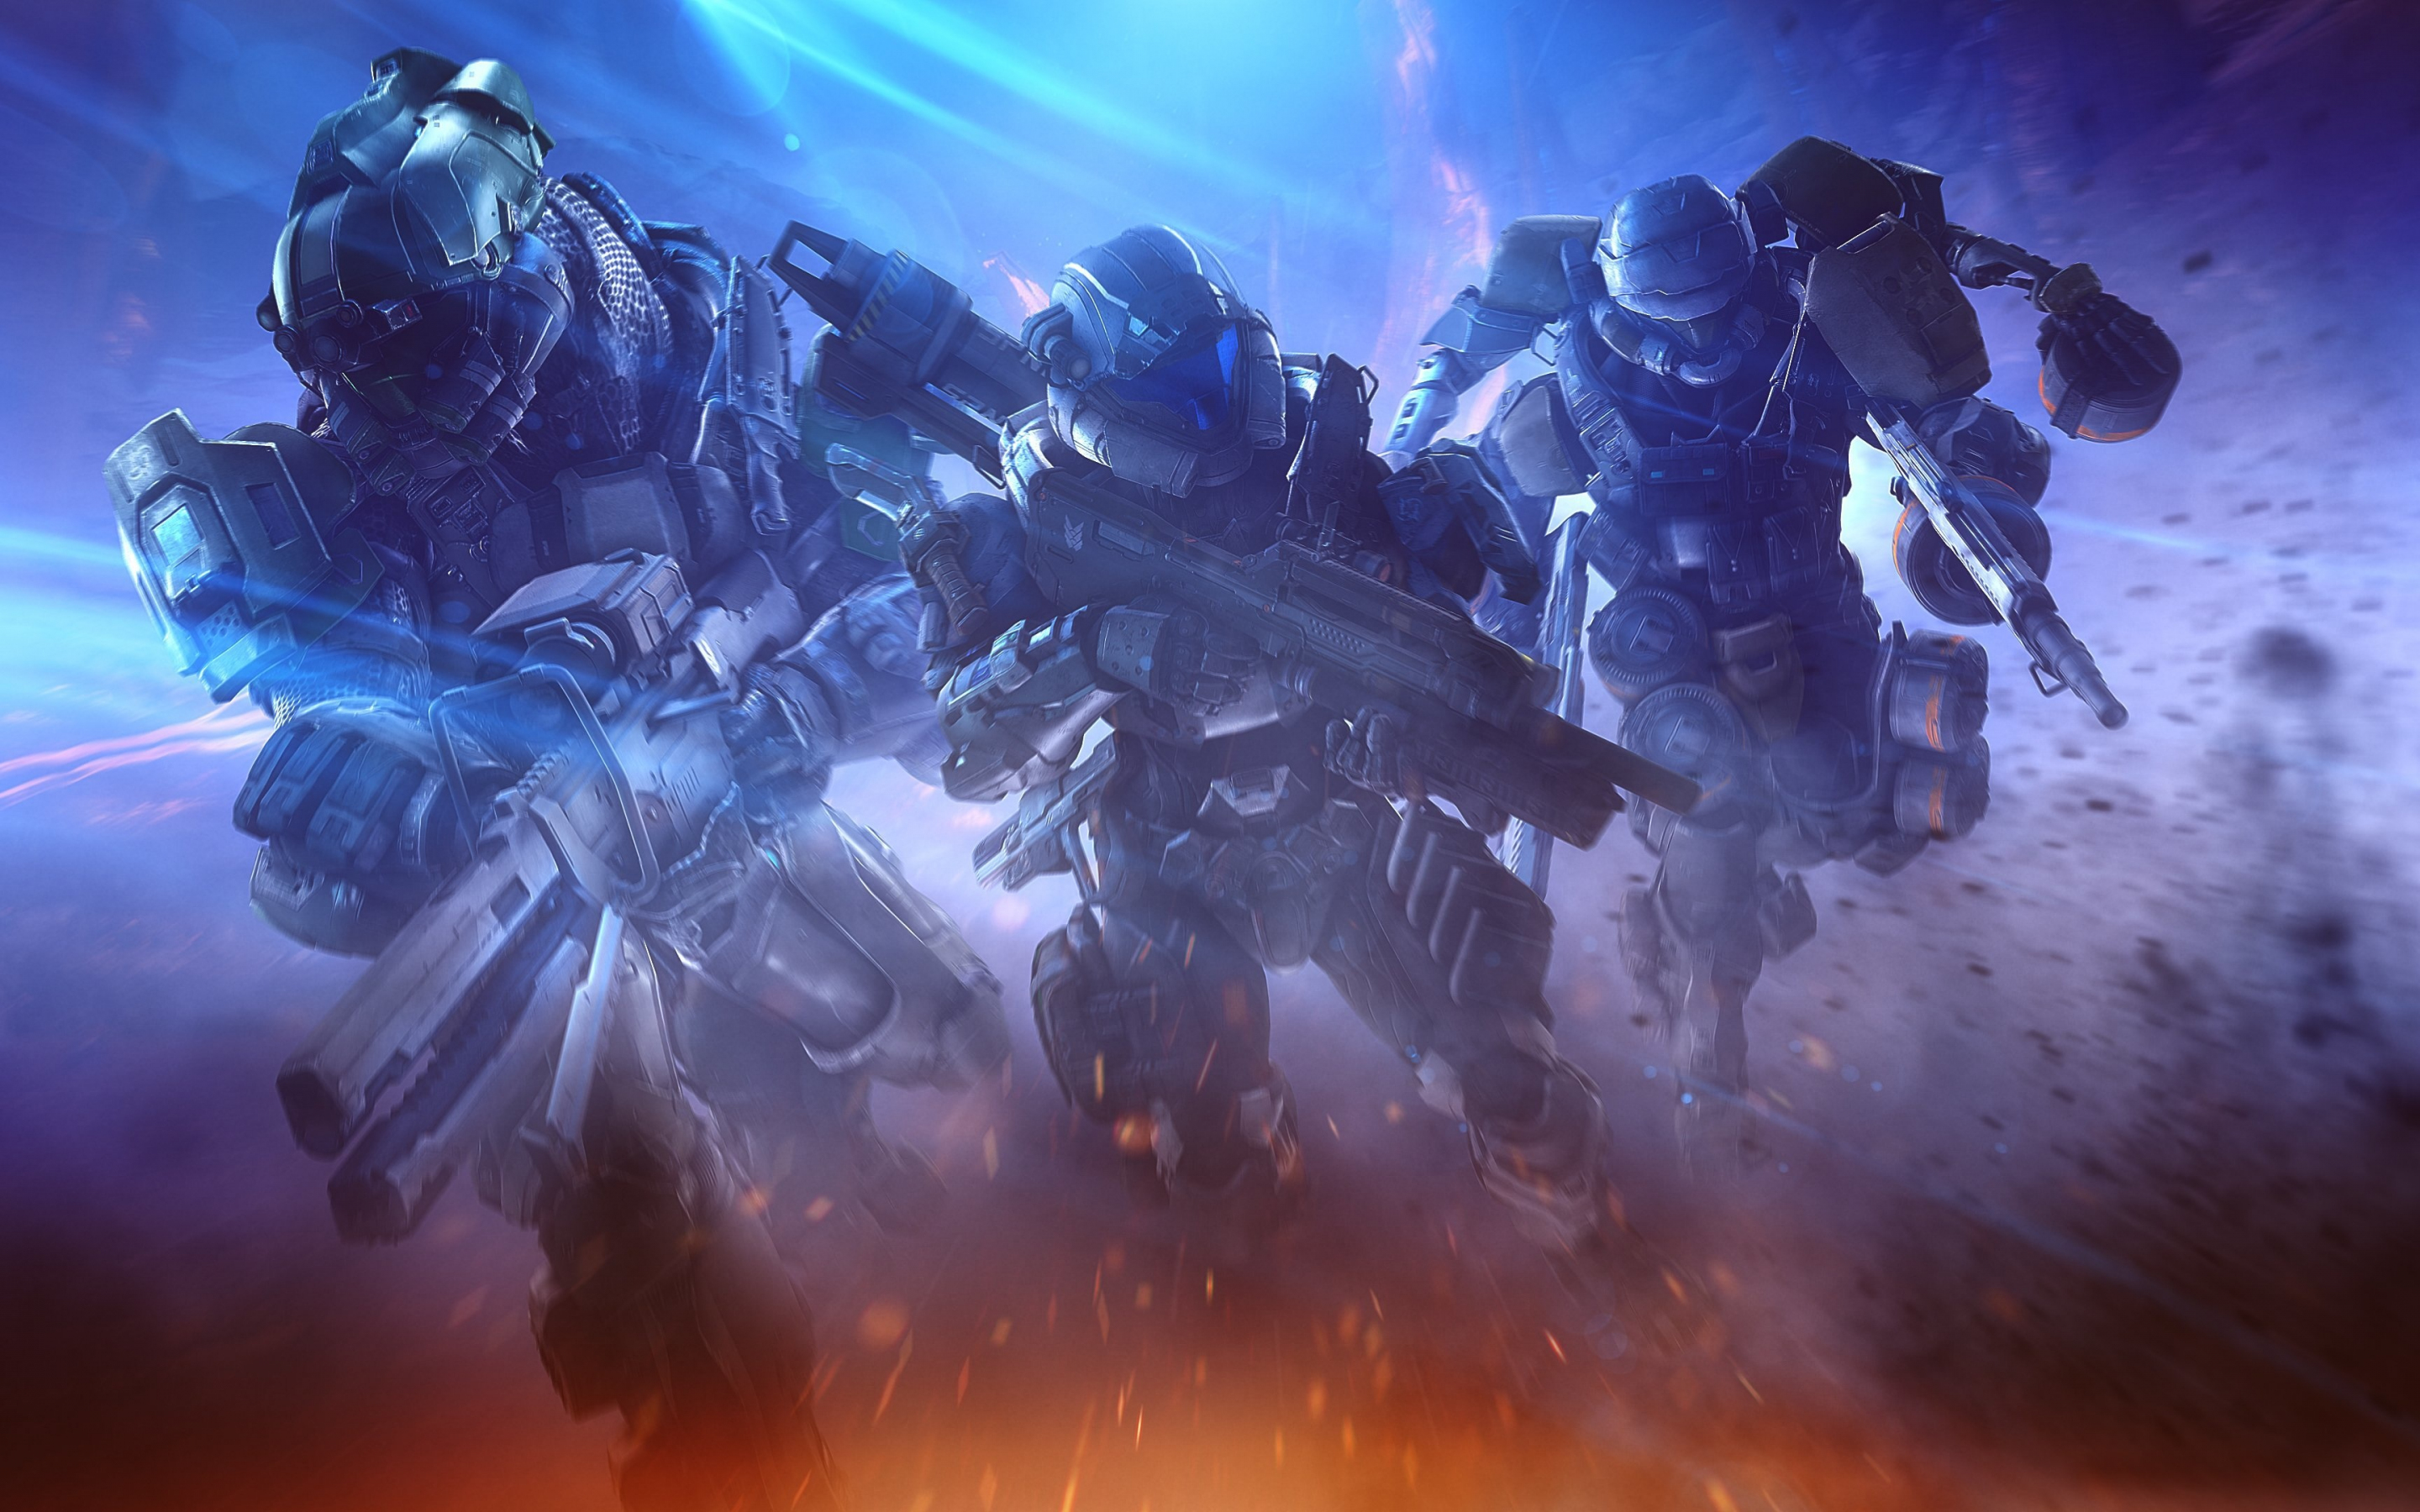 Spartans, halo series, video game, soldiers, 2880x1800 wallpaper